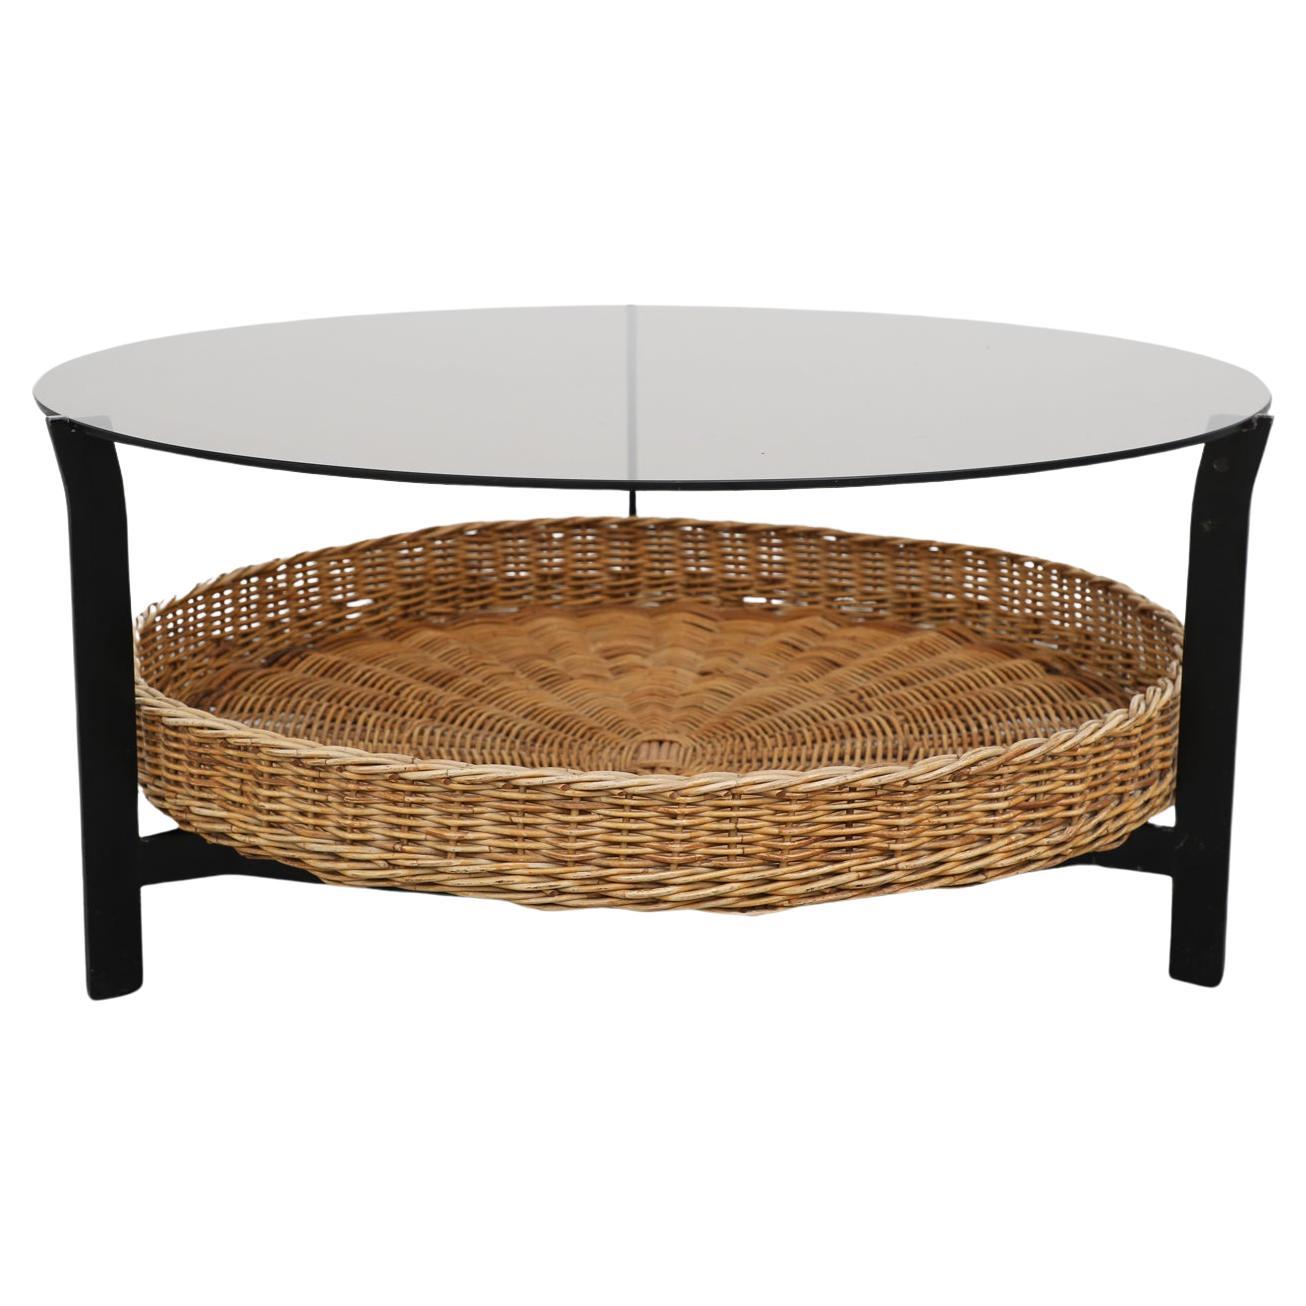 Mid-Century Modernist Coffee Table with Smoked Glass and Rattan Basket For Sale